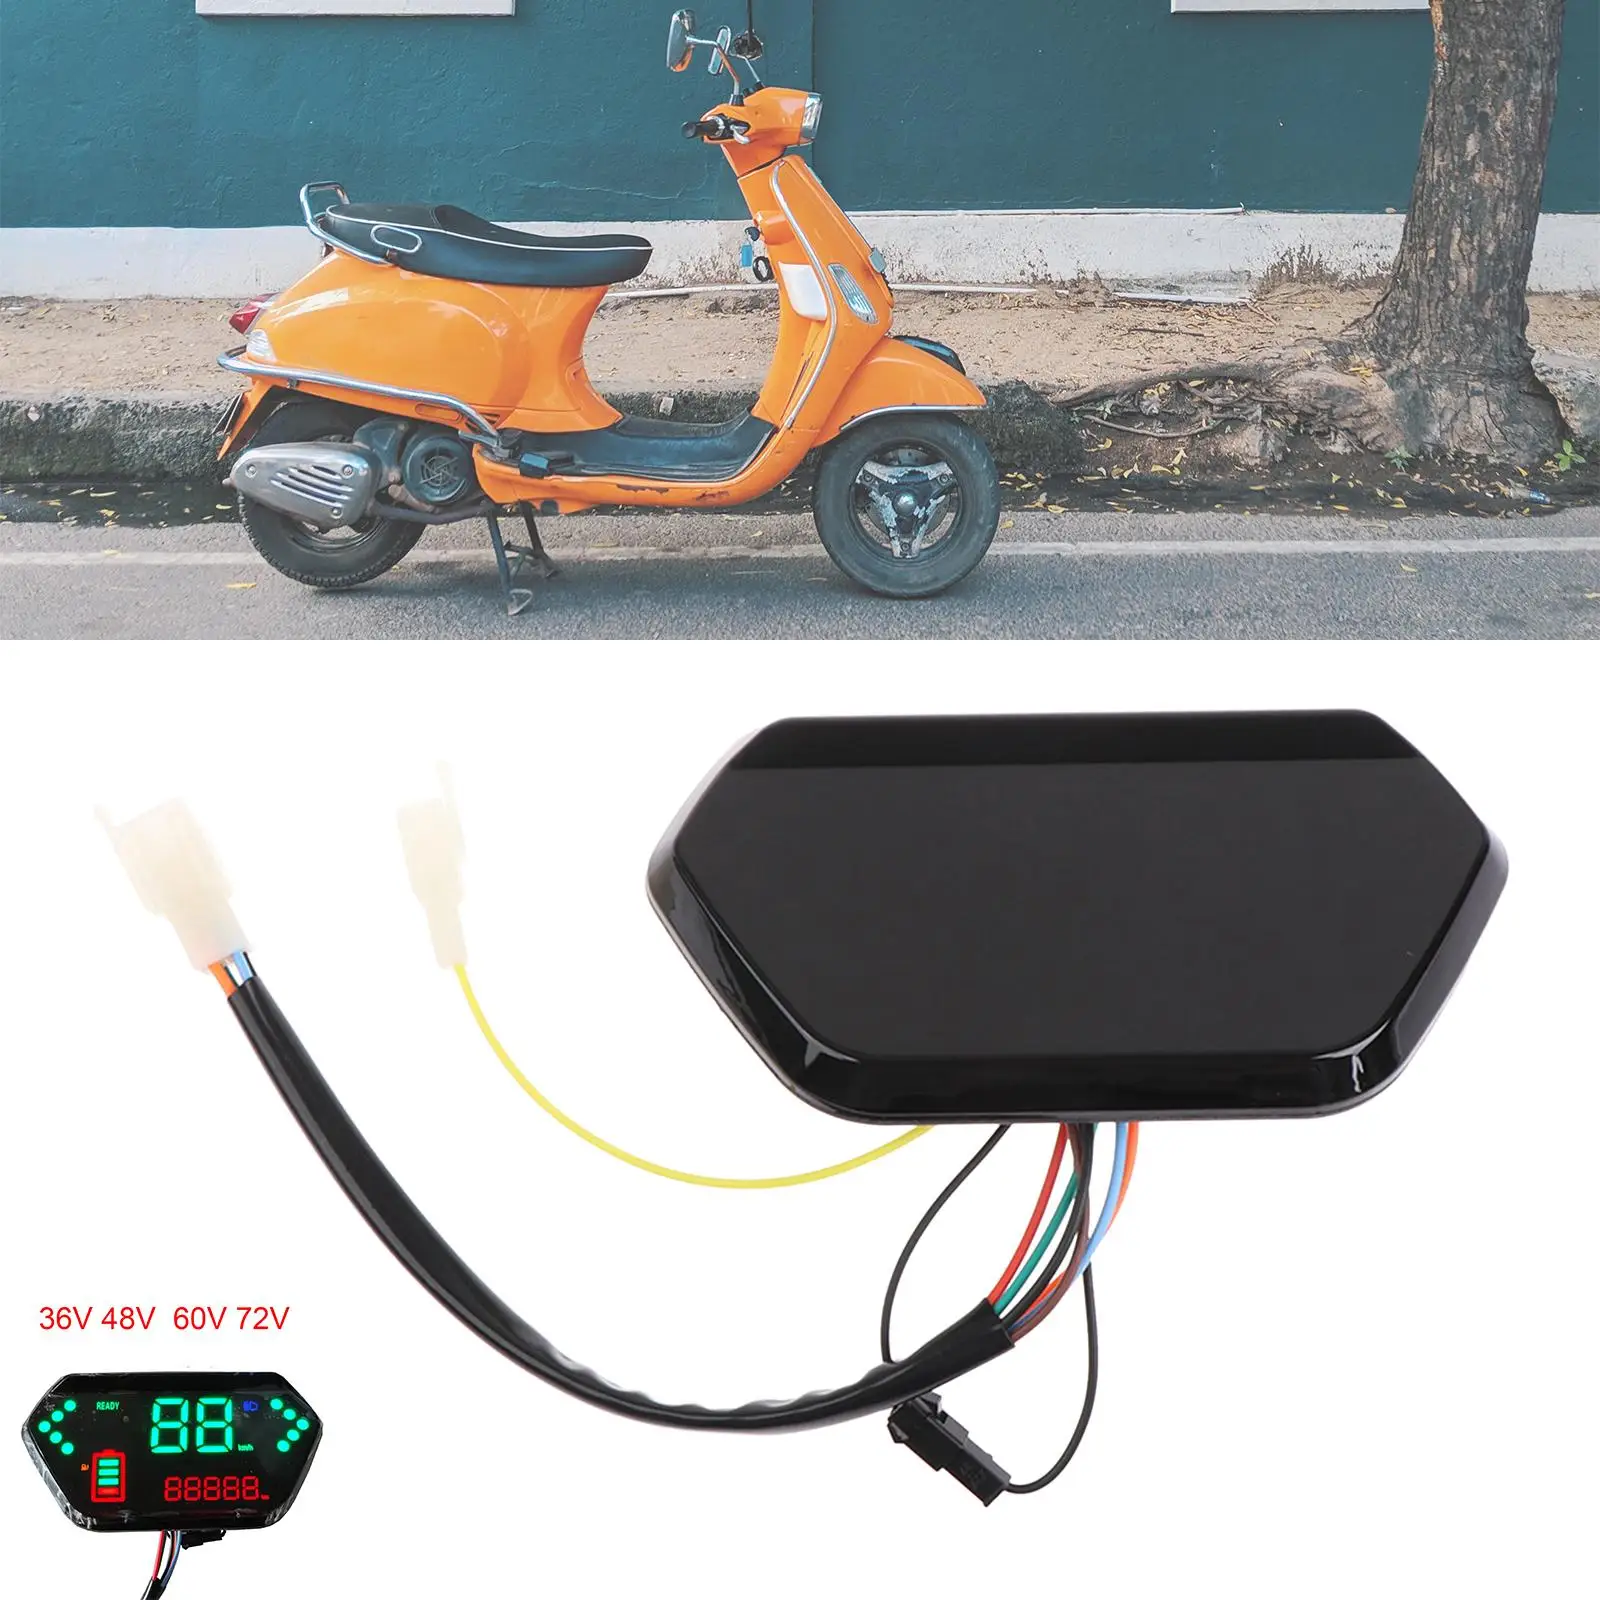 Electric Bicycle LCD Display Speedometer 36V 48V 60V 72V Speed Meter Bike Odometer Electric Vehicle Parts Accessories Durable